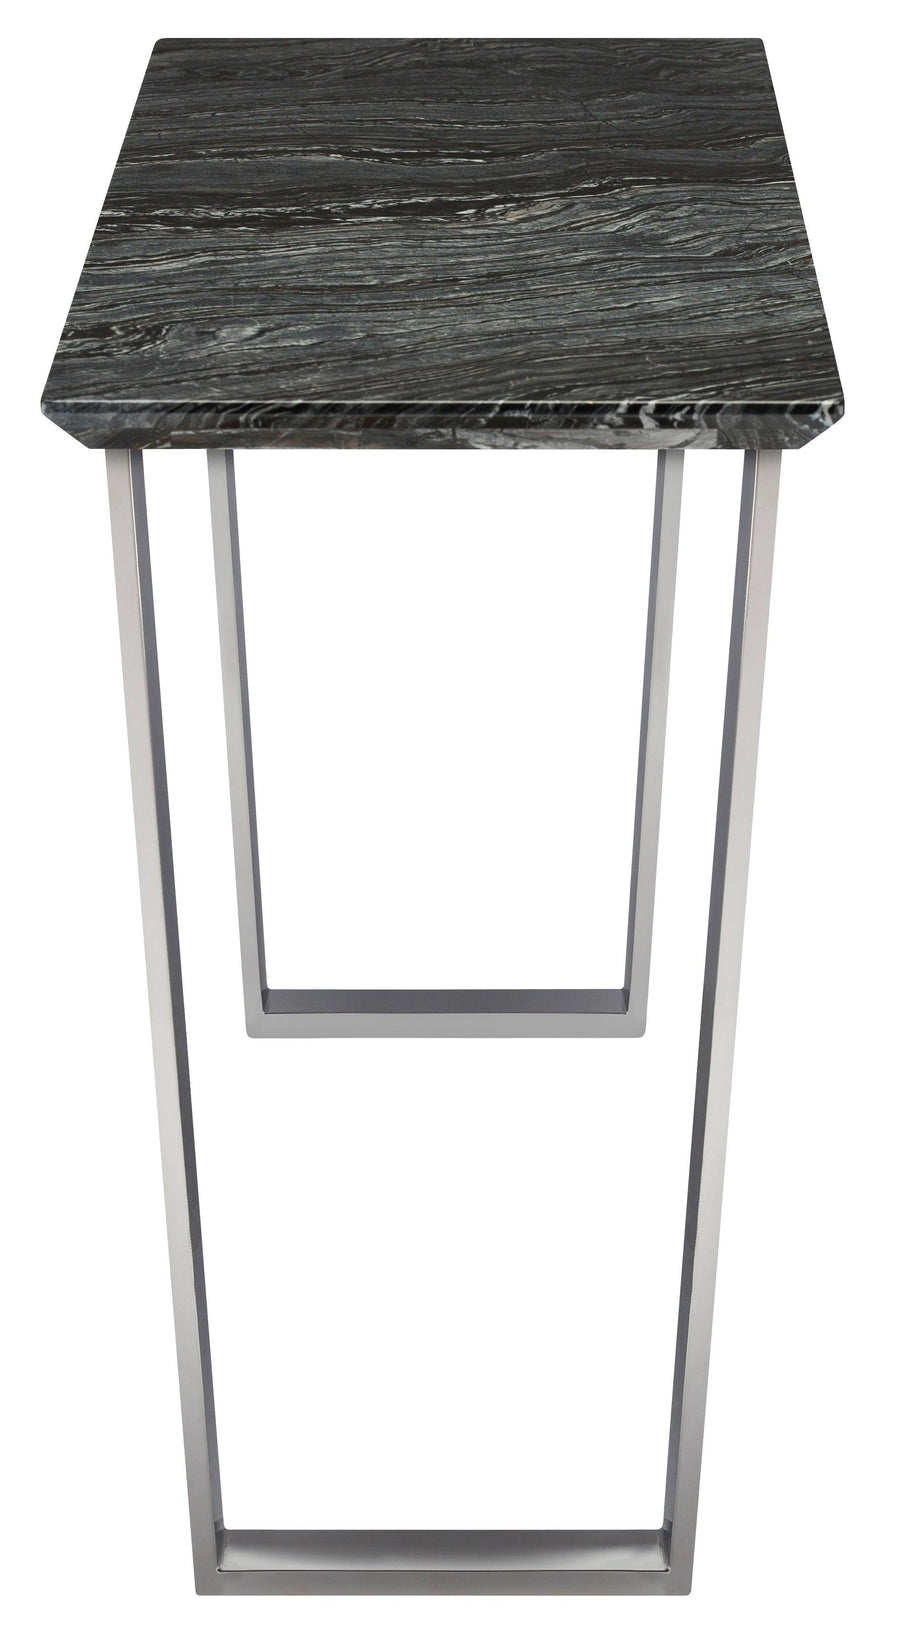 Catrine Console Table-Black Vein Marble/Stainless Steel - Maison Vogue